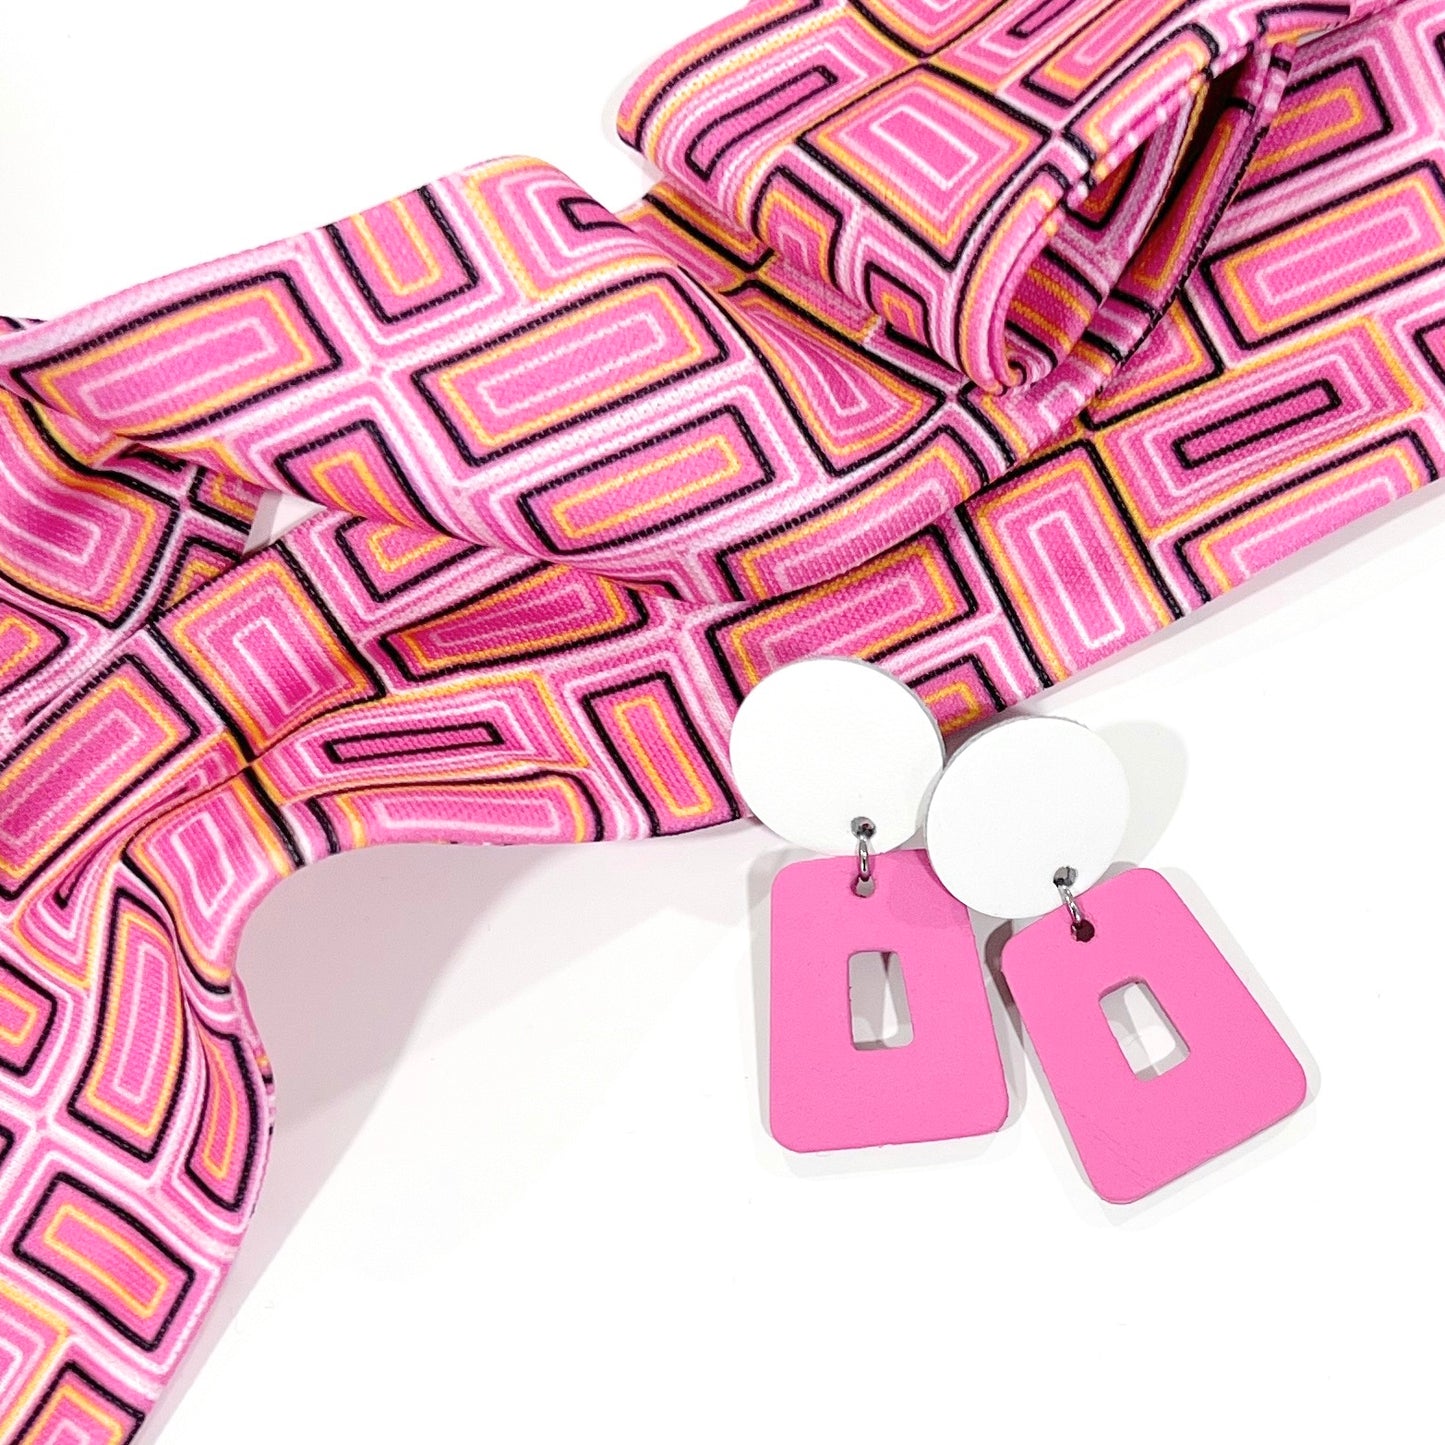 THE BEST EARRINGS/HEADBAND gift set in Pink Mixed Tape/ Leather Statement Accessories